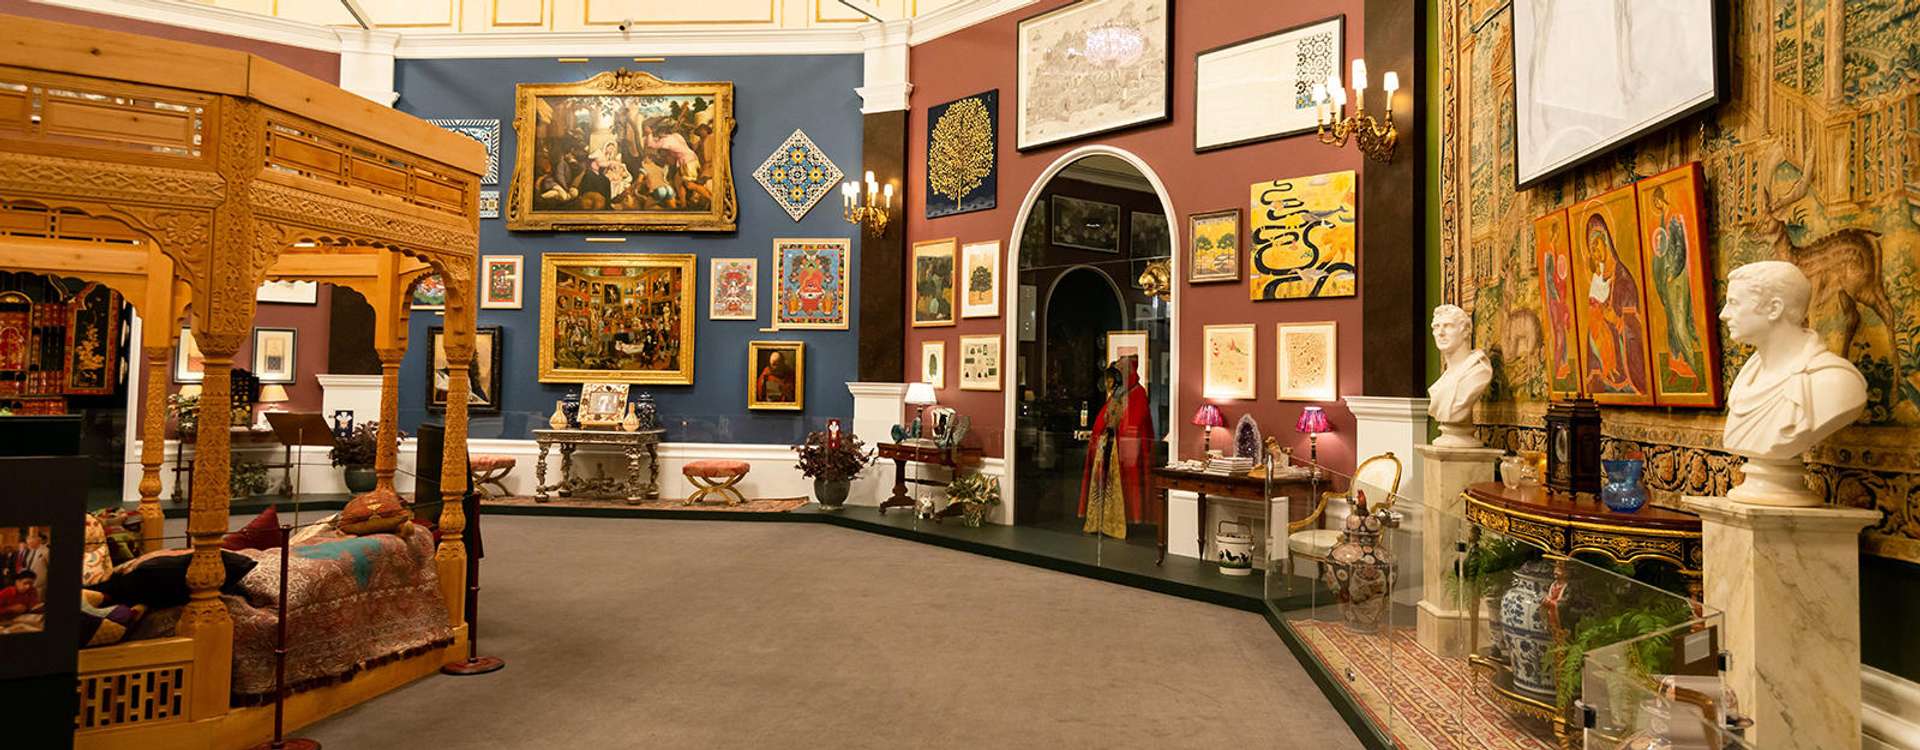 An image of the exhibition “Prince & Patron”, curated by then-Prince Charles at Buckingham Palace.  The image shows a large number of artworks and objects, including paintings, sculptures and furniture.